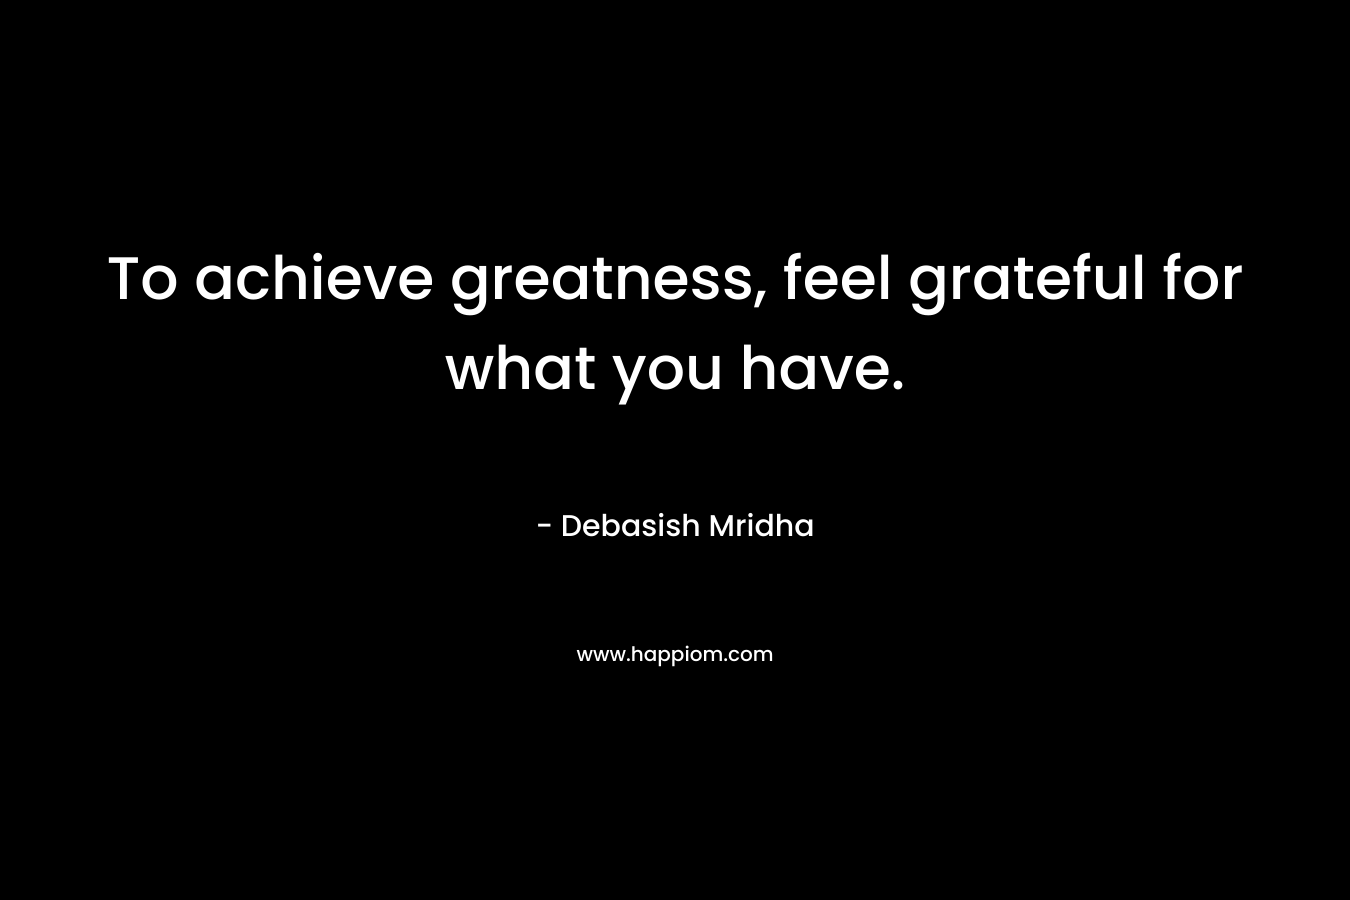 To achieve greatness, feel grateful for what you have.